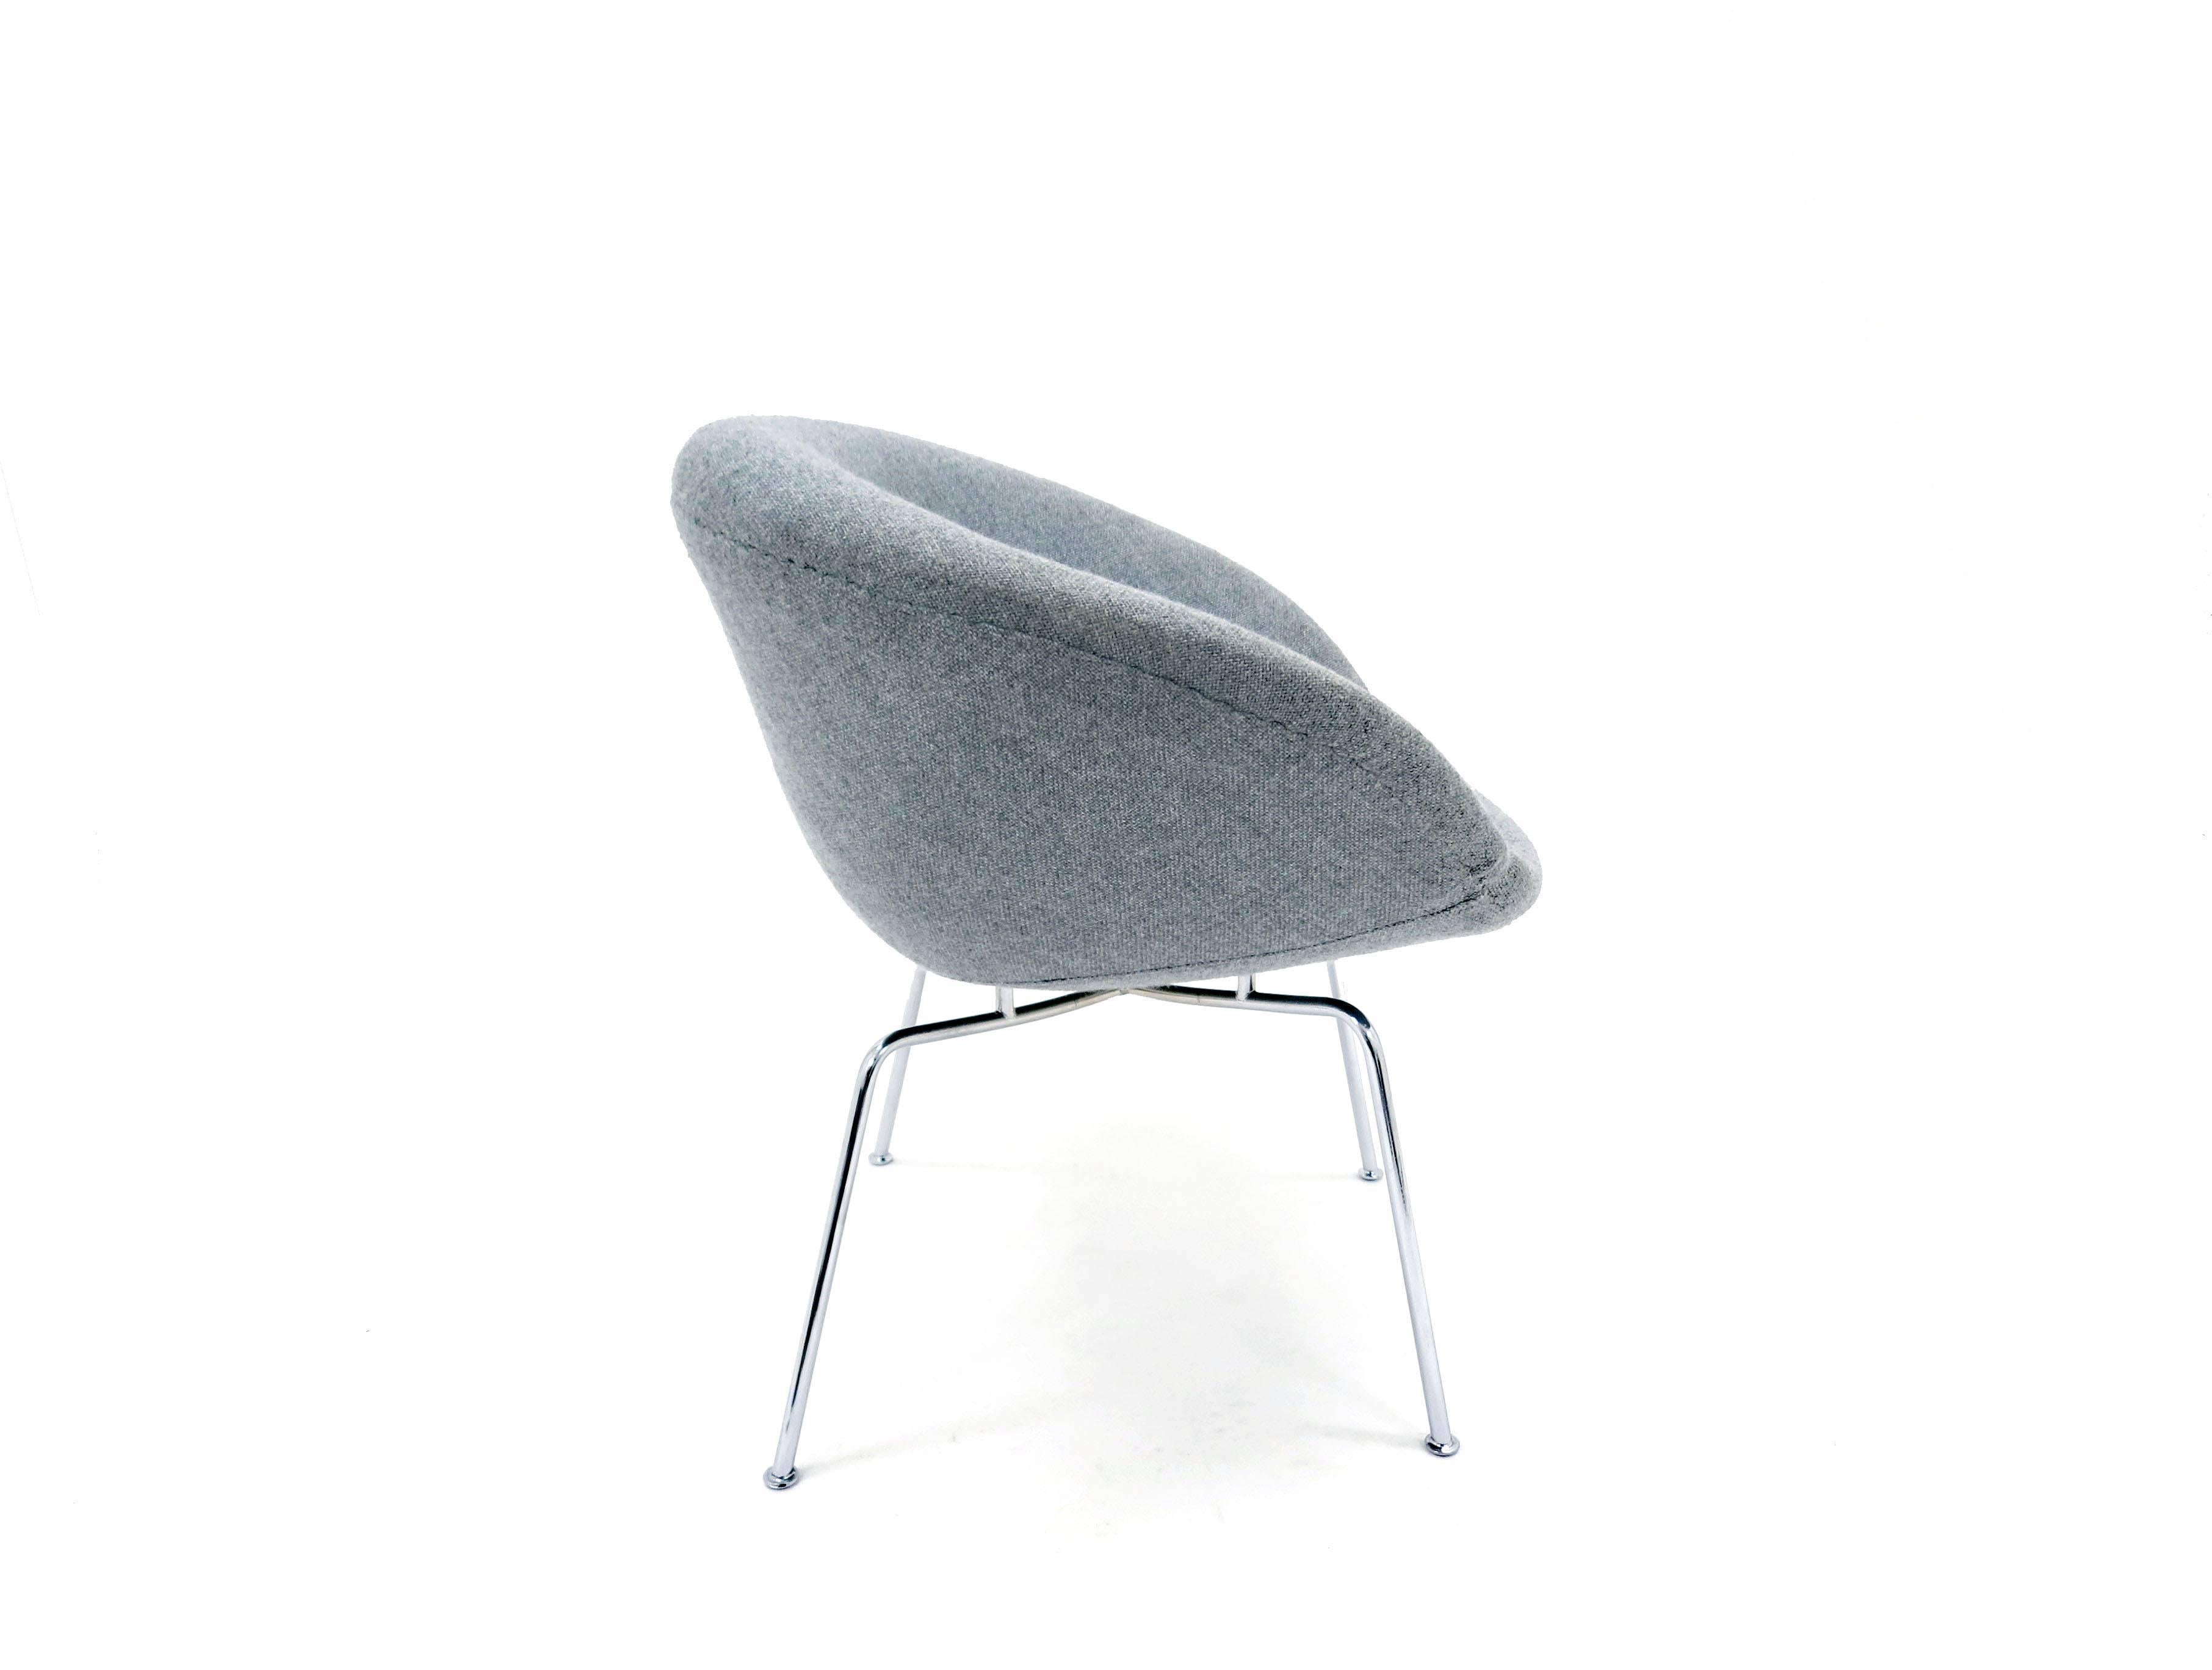 A pretty pot chair model number 3318 designed by Arne Jacobsen for Fritz Hansen in the 1950s. Grey wool upholstery on chromed tubular steel legs, all in an excellent original condition.

A rare and unusual design by Arne Jacobsen the pot chair is